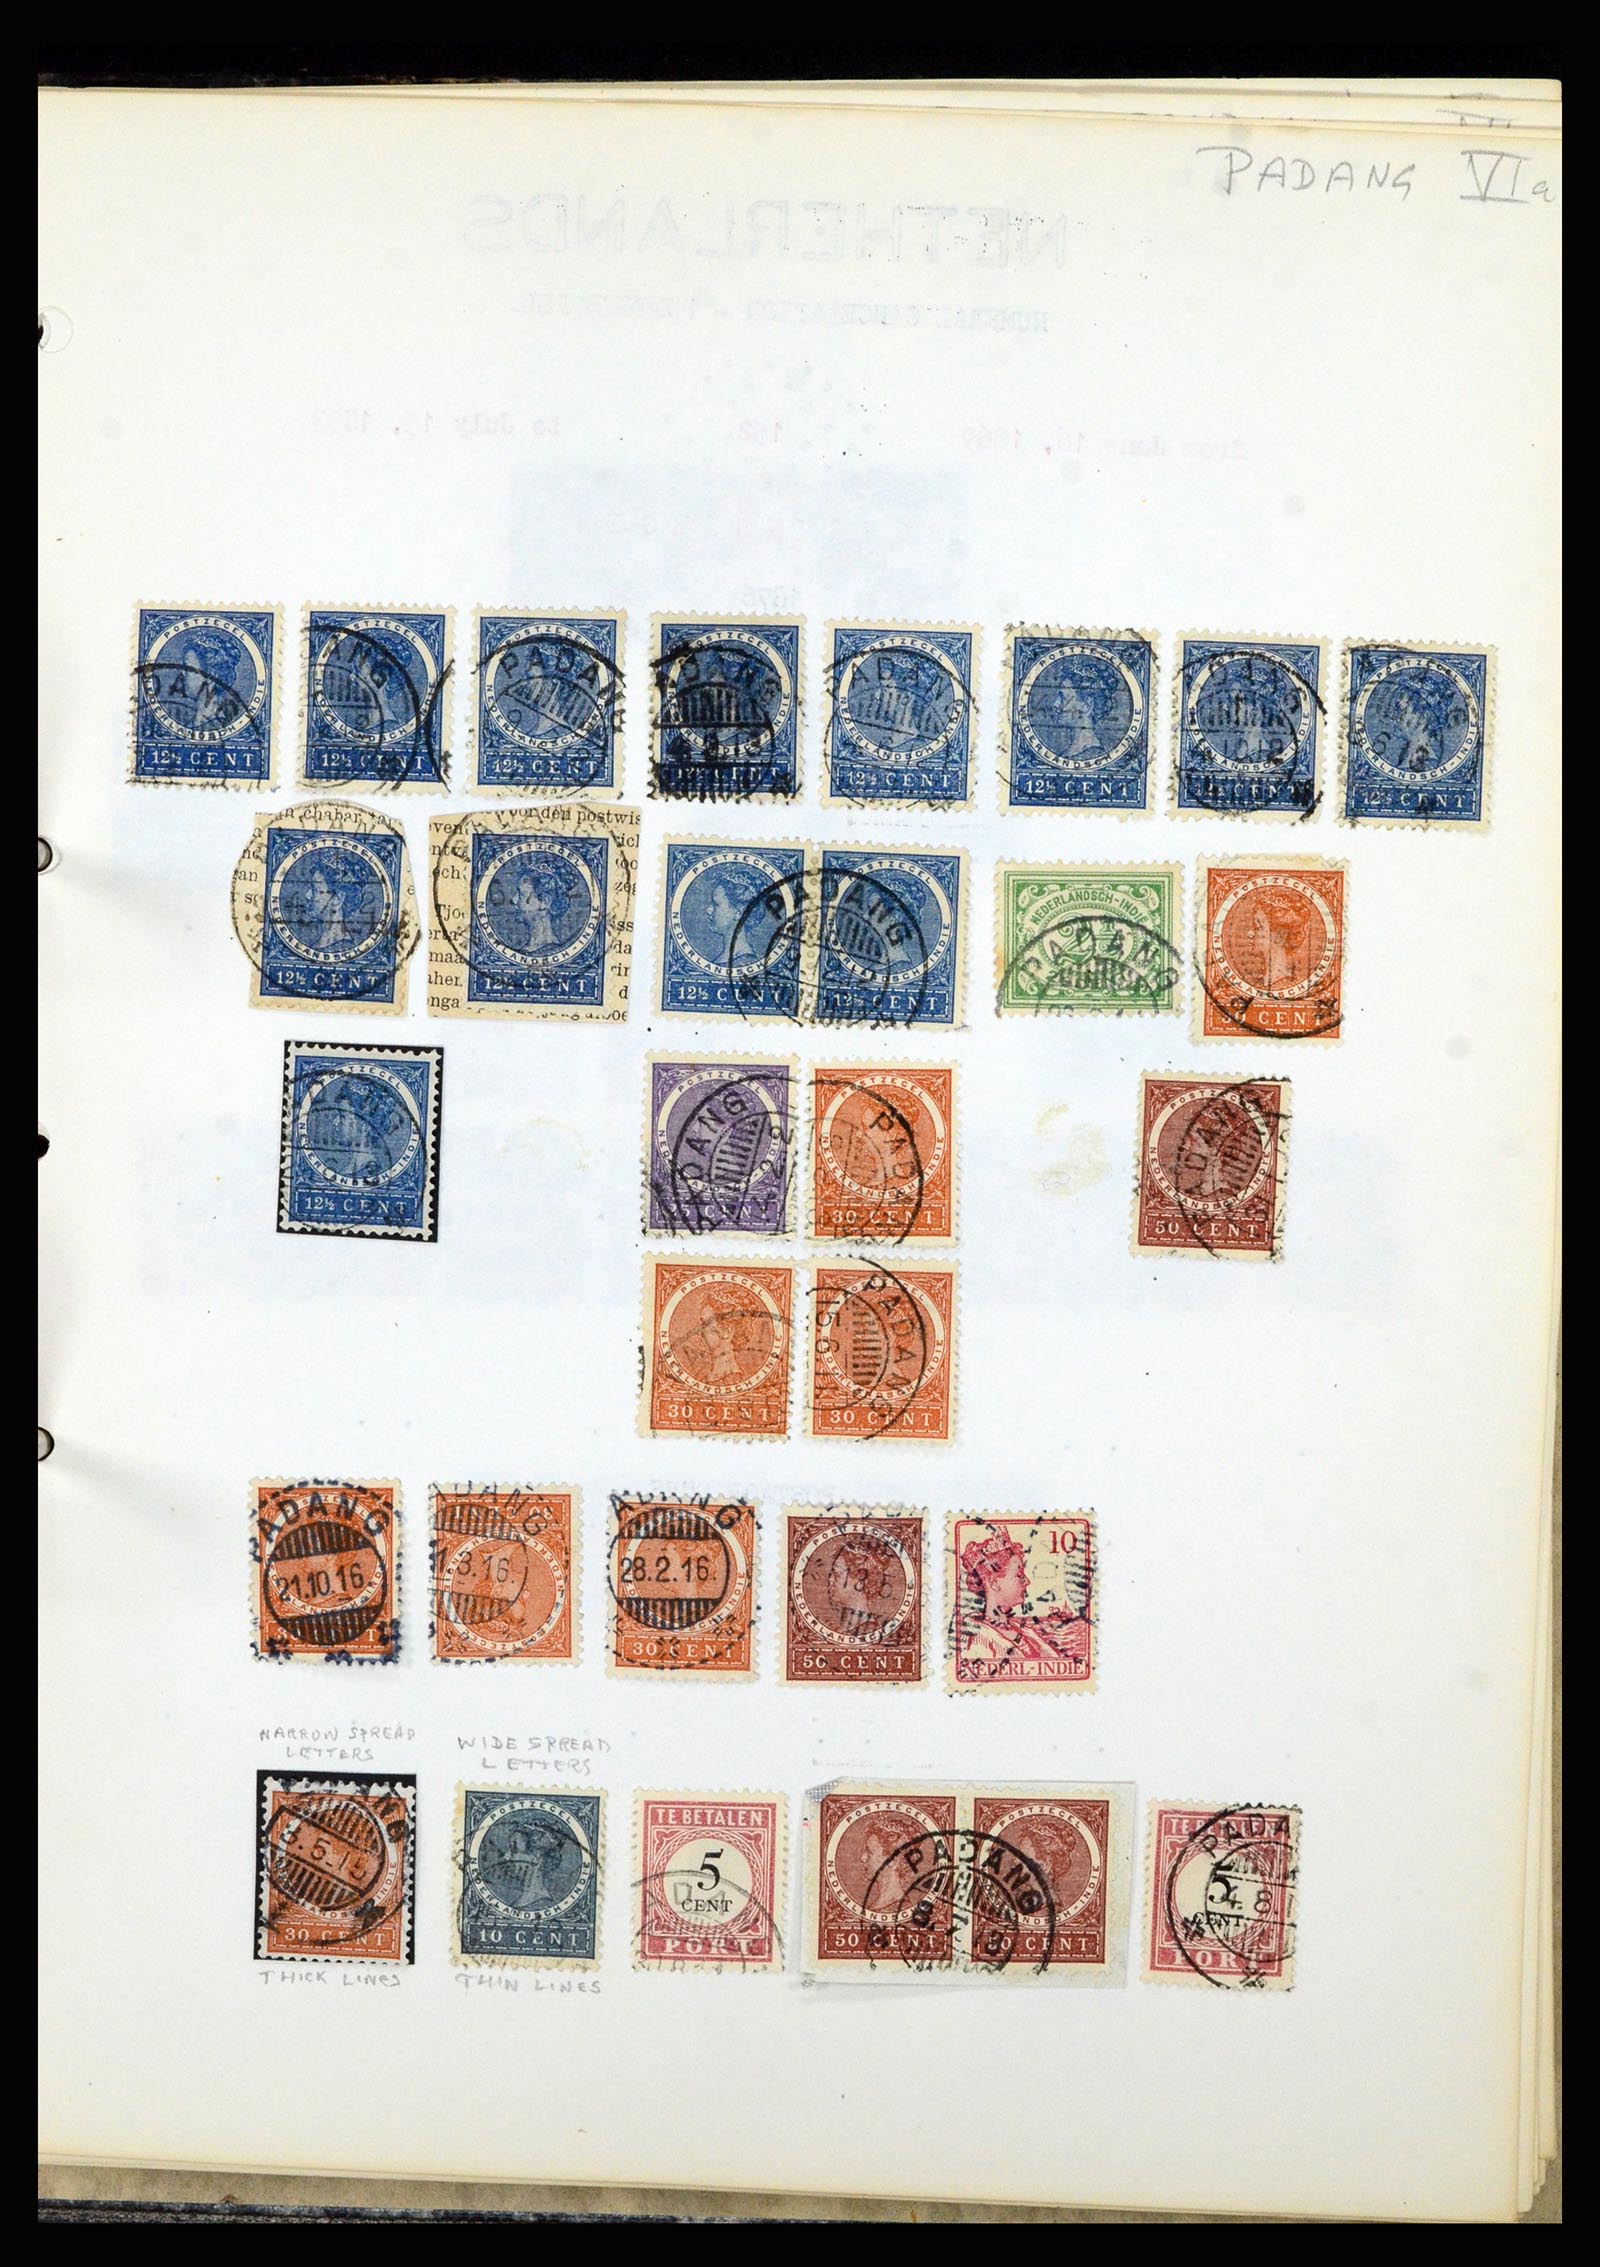 36841 078 - Stamp collection 36841 Dutch east Indies short bar cancels.